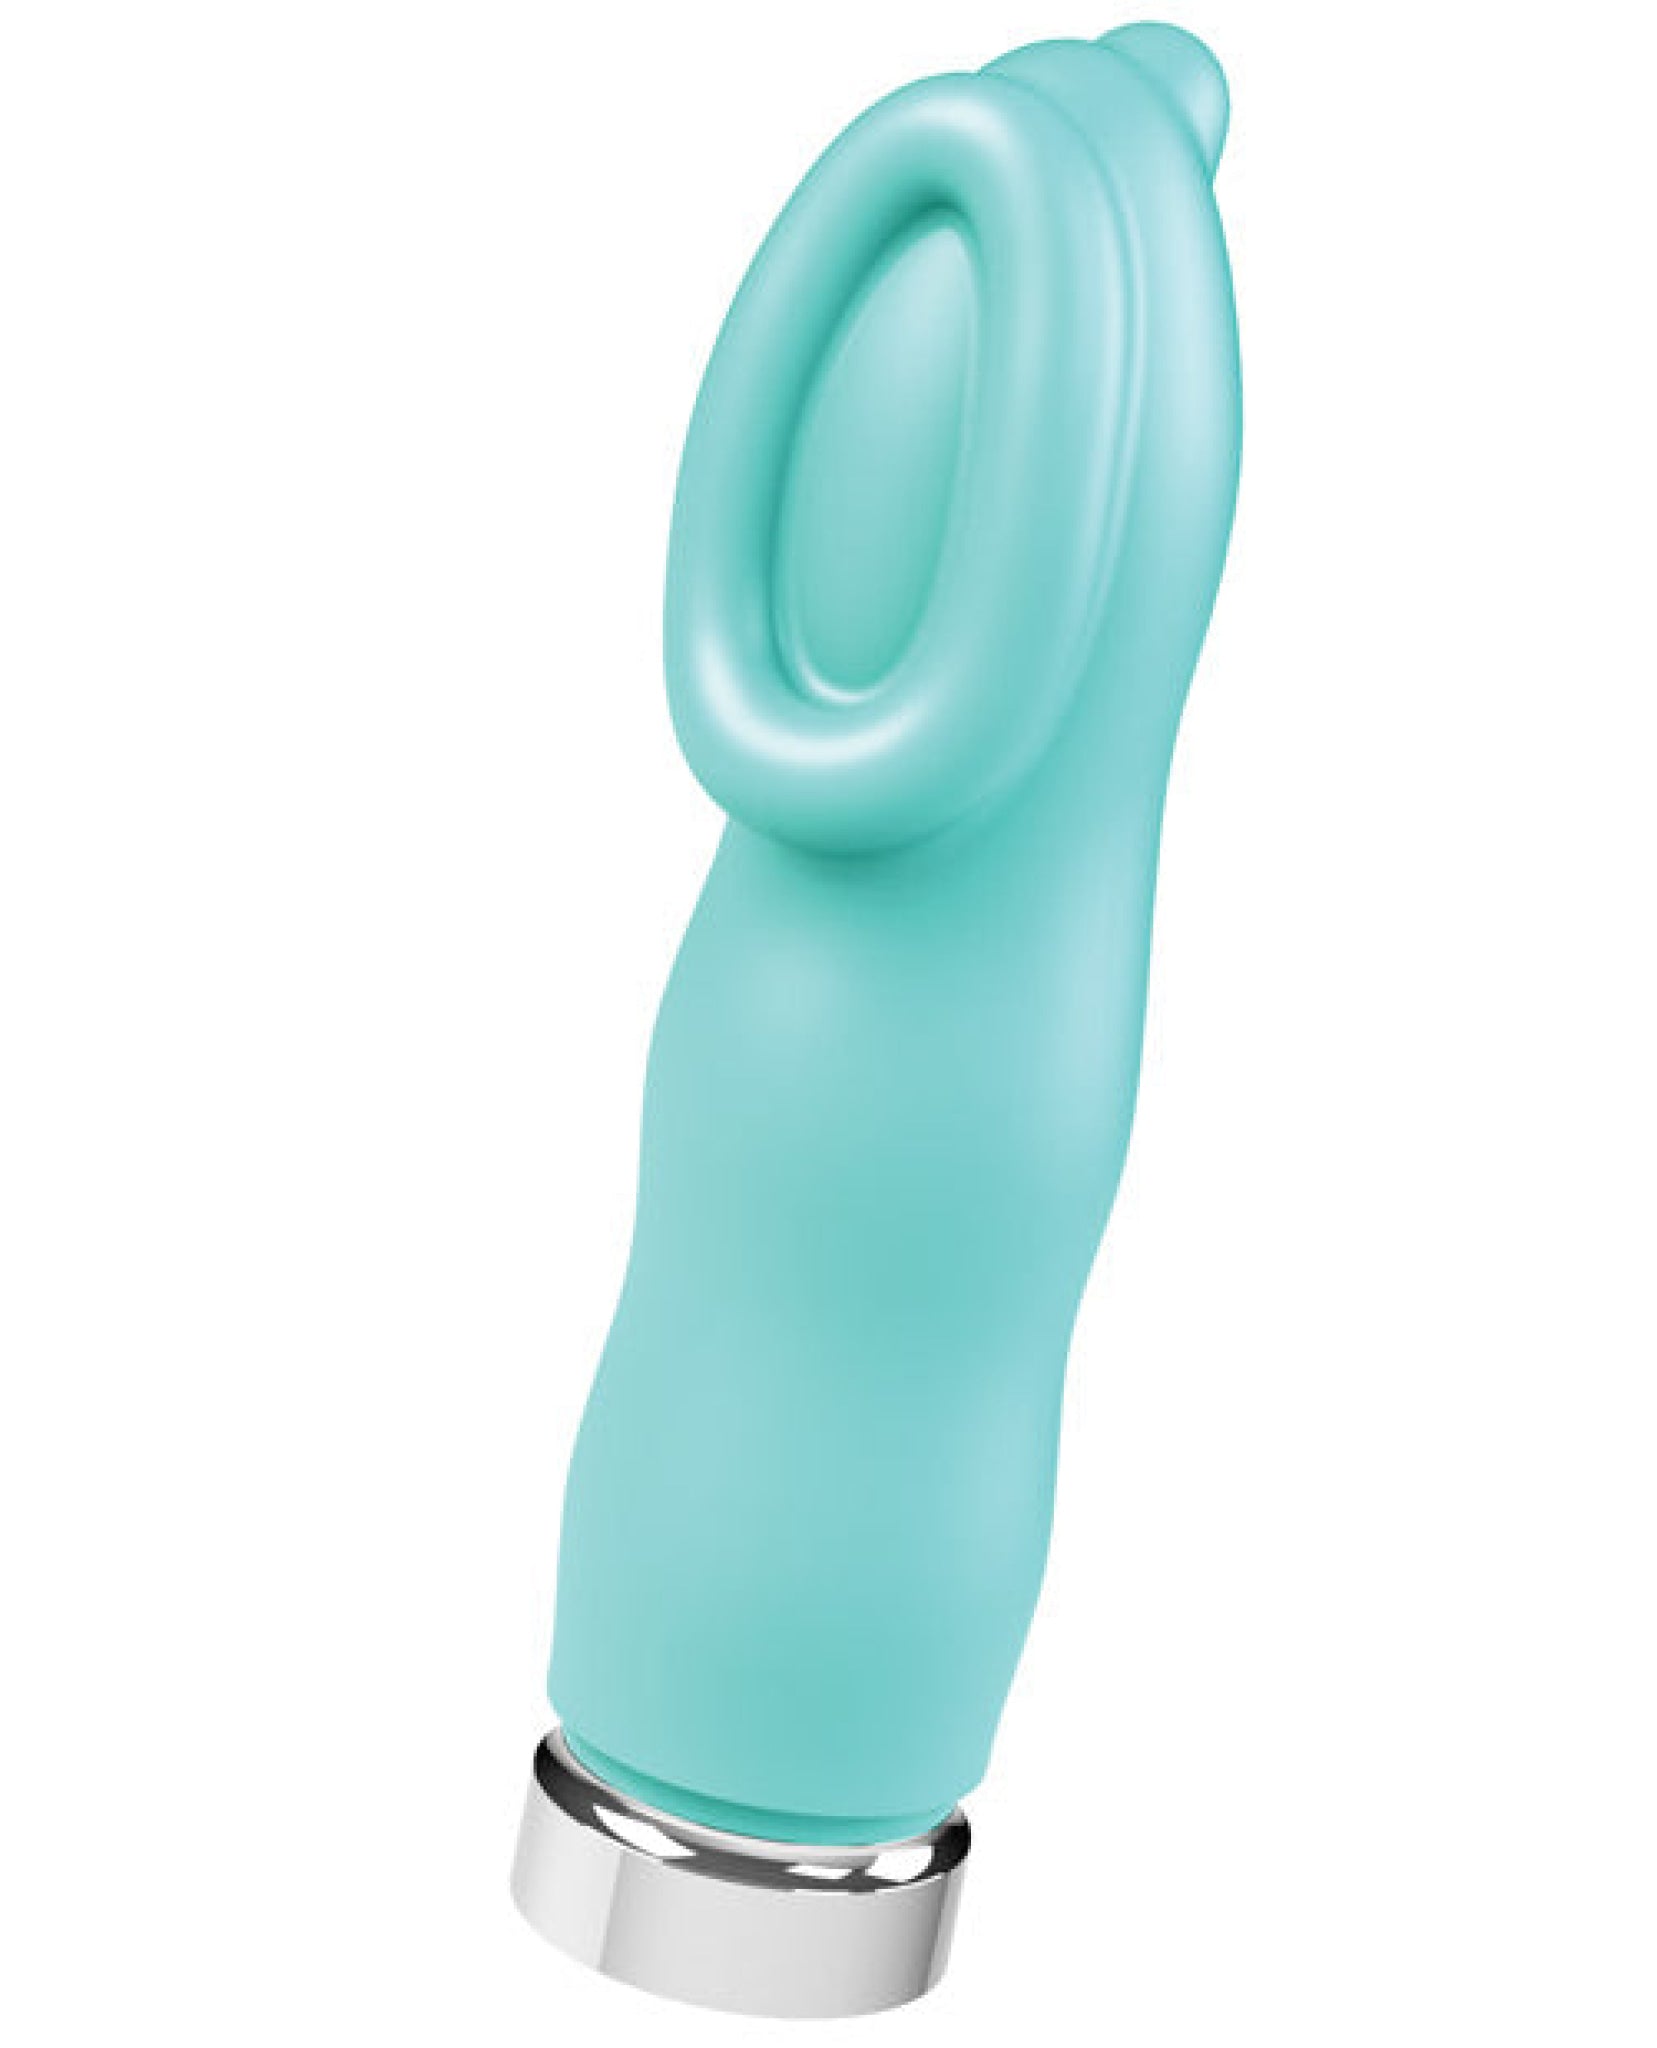 Vedo Luv Plus Rechargeable Vibe VēDO